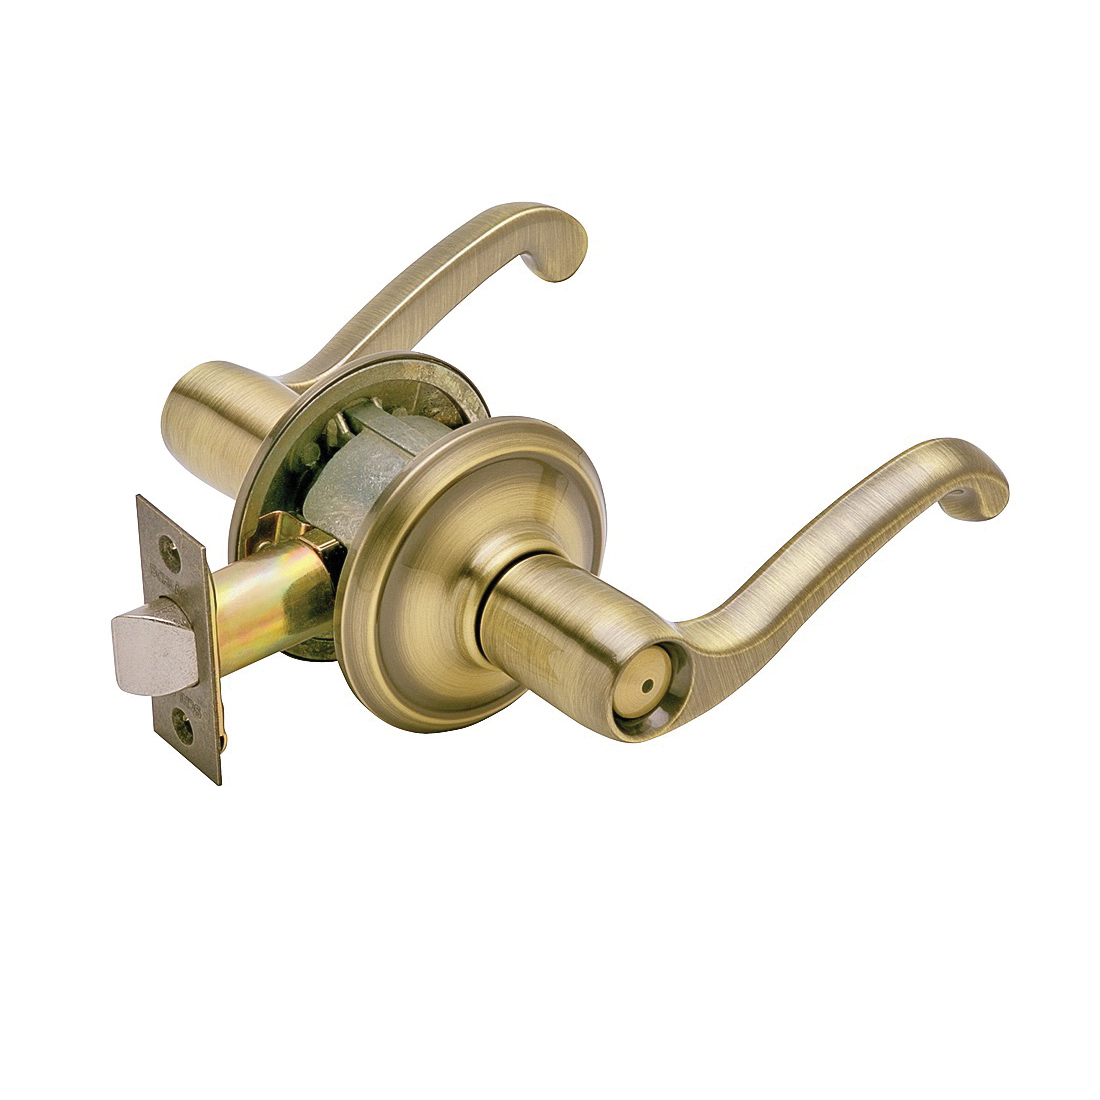 F Series F40 FLA 609 Privacy Lever, Mechanical Lock, Antique Brass, Metal, Residential, 2 Grade